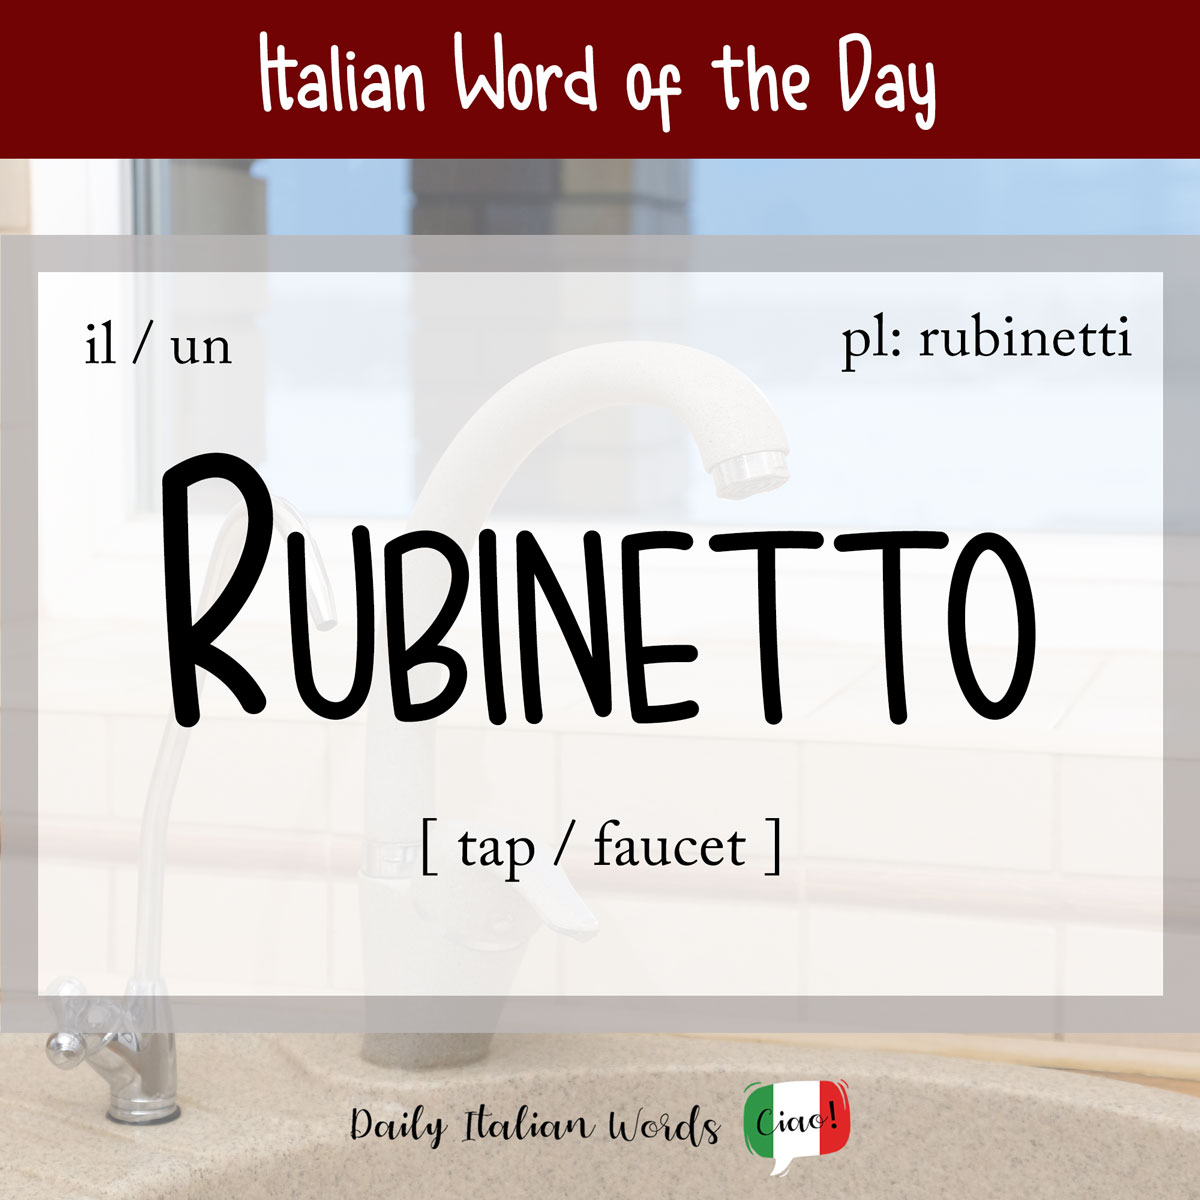 Italian word of the day: Rubinetto (tap/faucet)